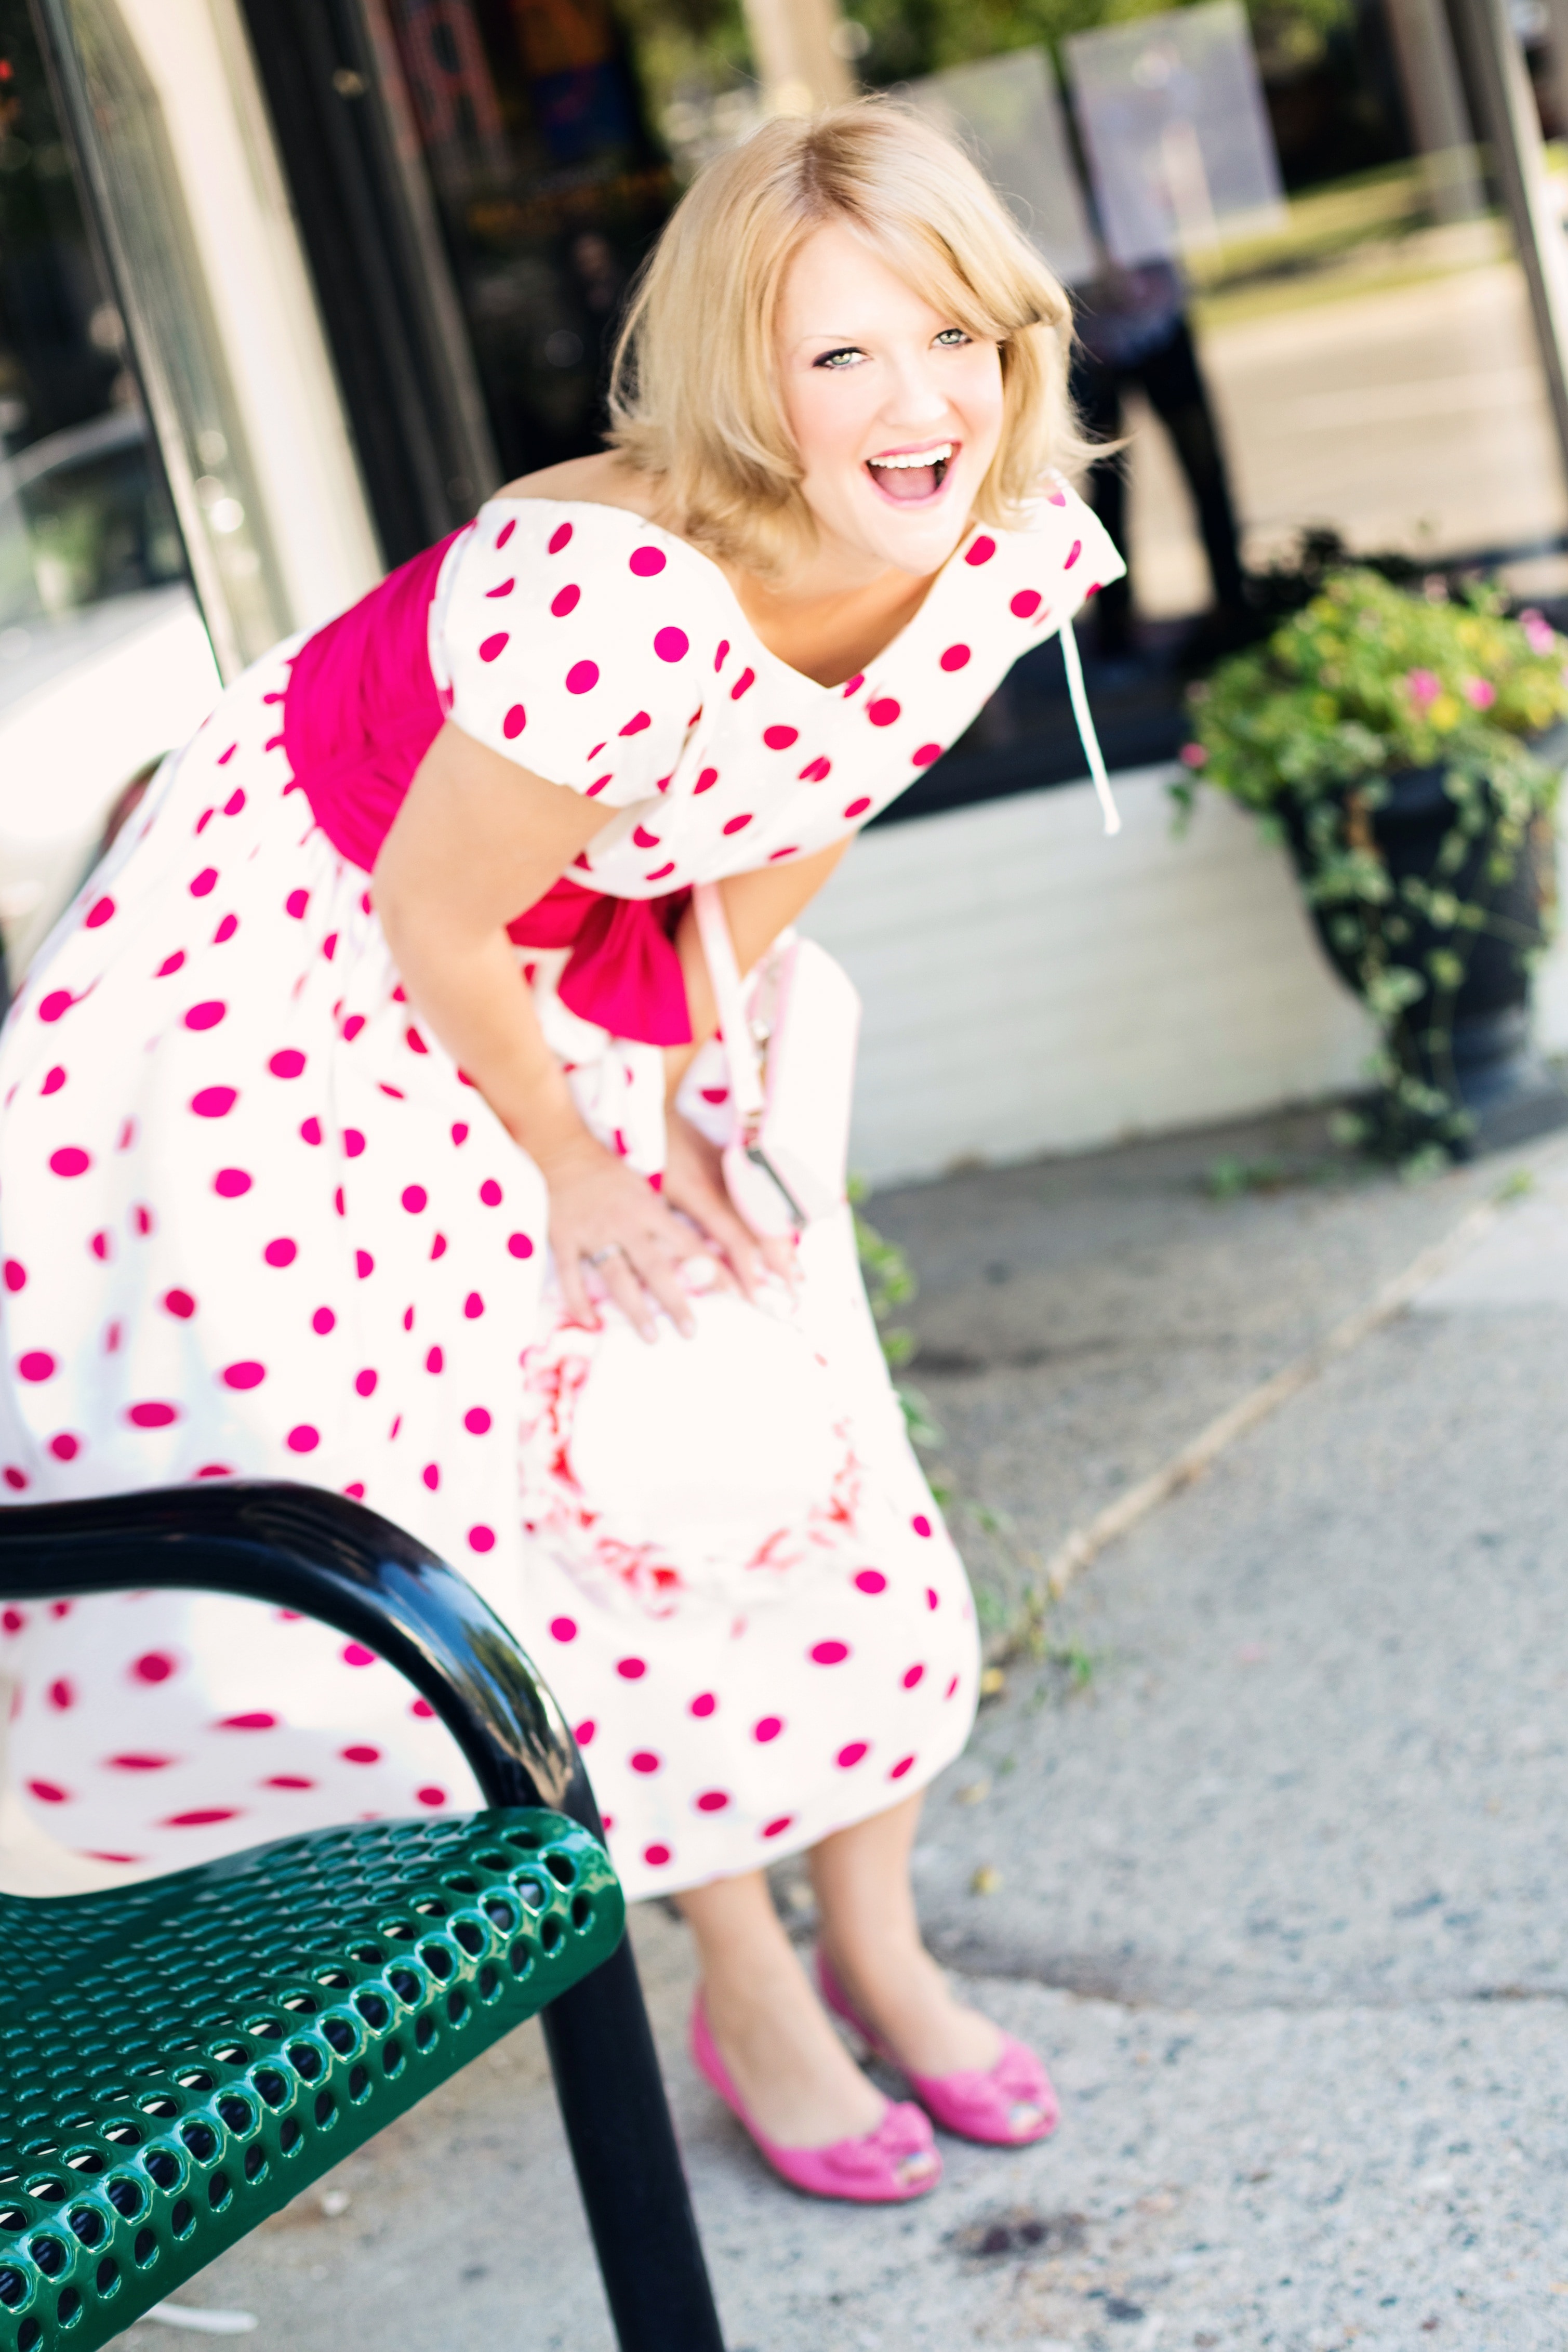 Womens Pink And White Polka Dot Dress And Pink Patent Leather Pumps Free Image Peakpx